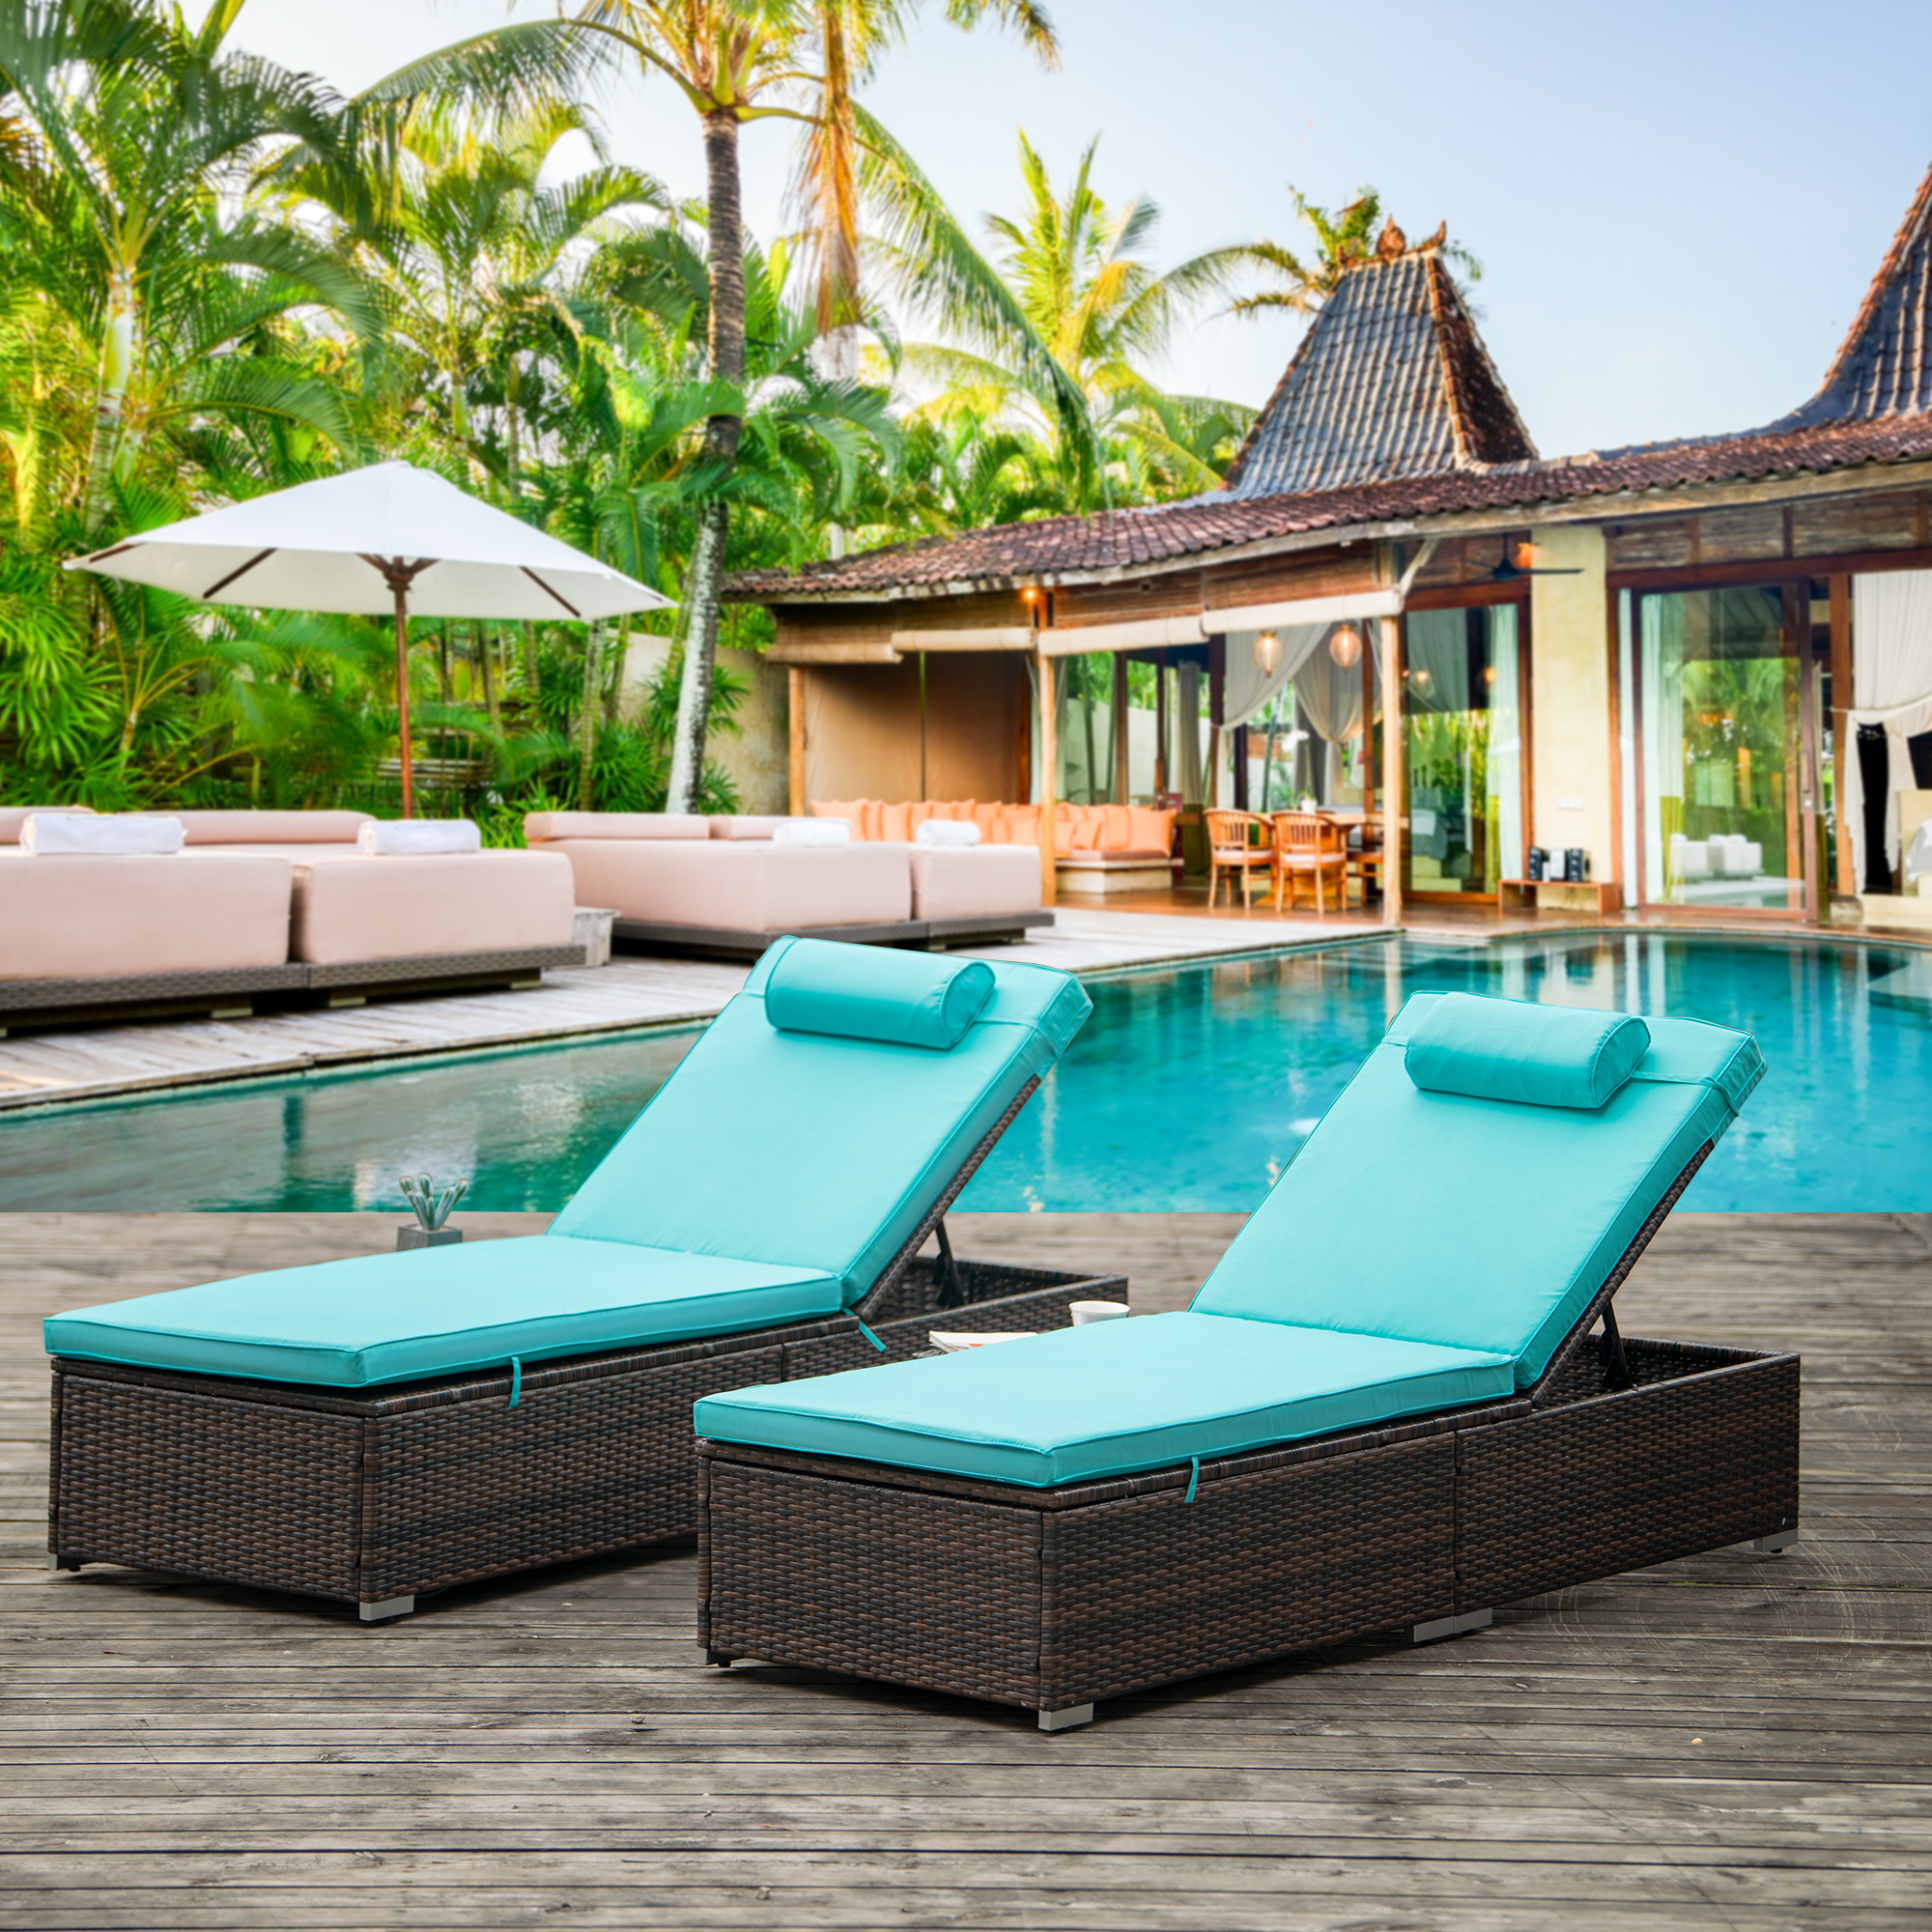 Set of 2 Rattan Chaise Lounge Chairs with Side Table, Outdoor Reclining Chairs Set W/Adjustable Backrest, Cushions and Head Pillow, Chaise Lounge Furniture Set for Poolside Beach Garden Patio, B66 - image 3 of 11